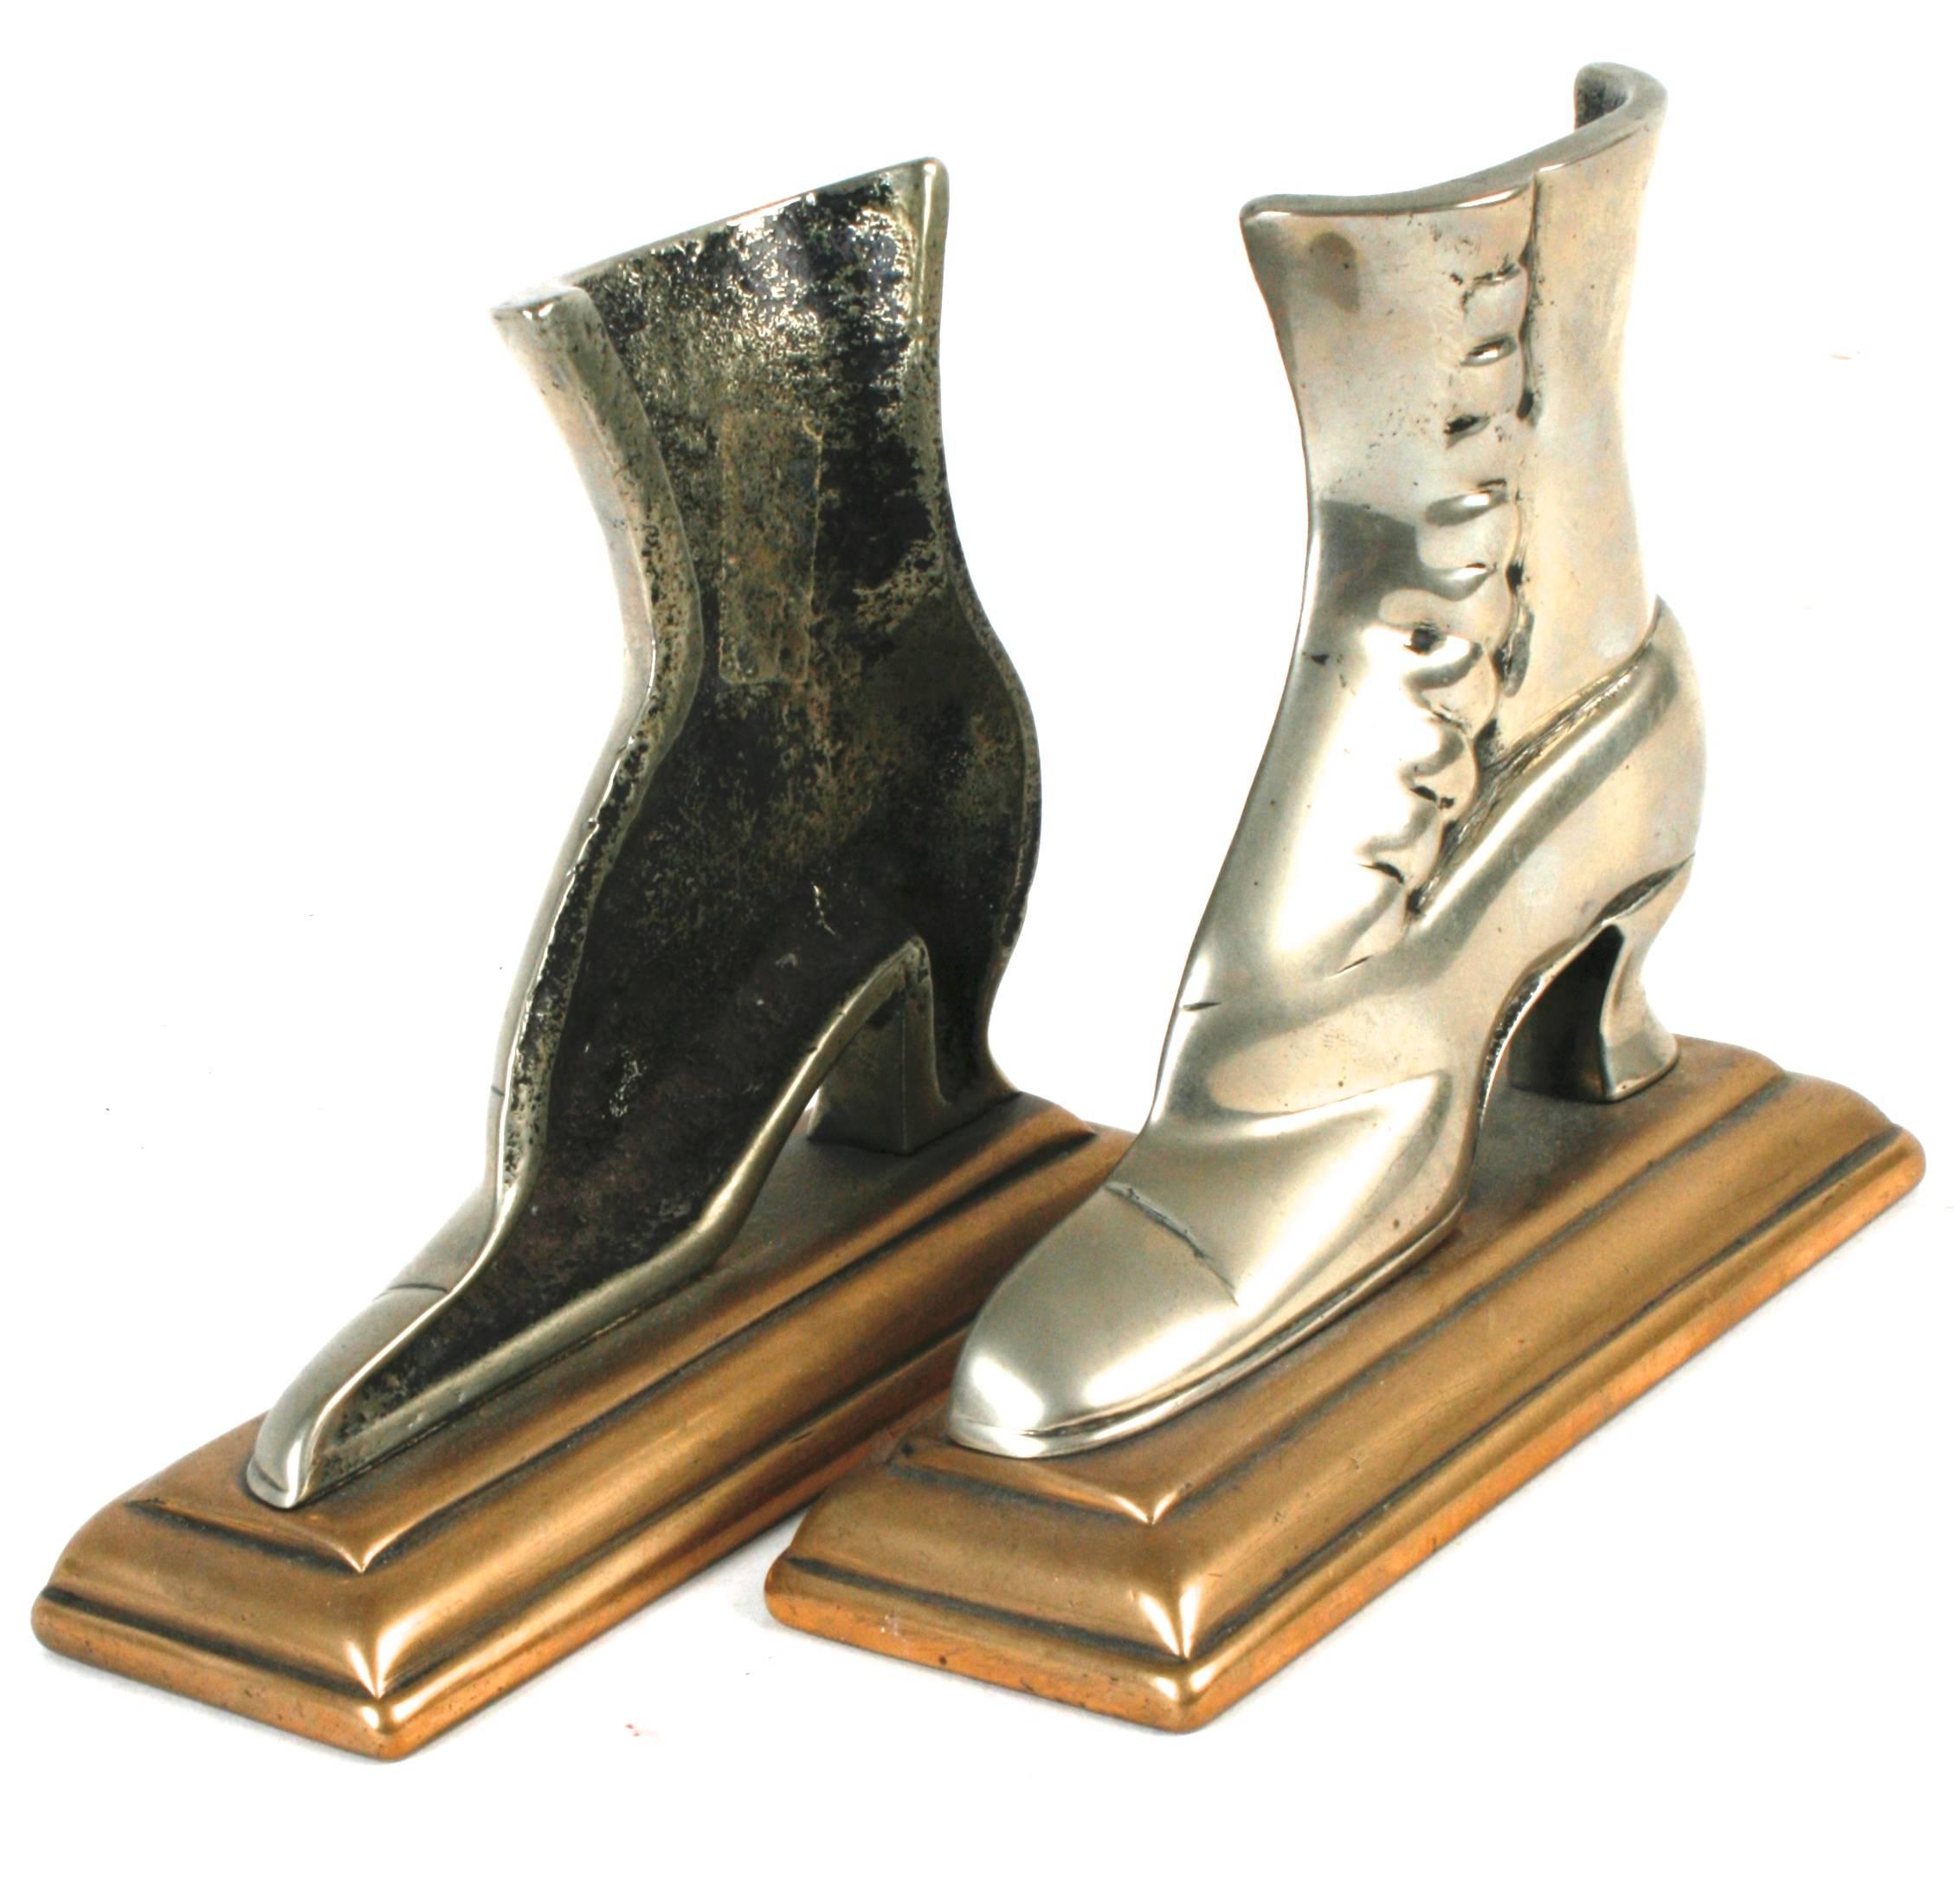 A pair of brass bookends in the shape of Victorian button-up shoes. No maker's mark.
NPT Books a division of N.P. Trent Antiques has a large collection of used and out of print books on art, architecture, decoration and antiques with a focus on 1st